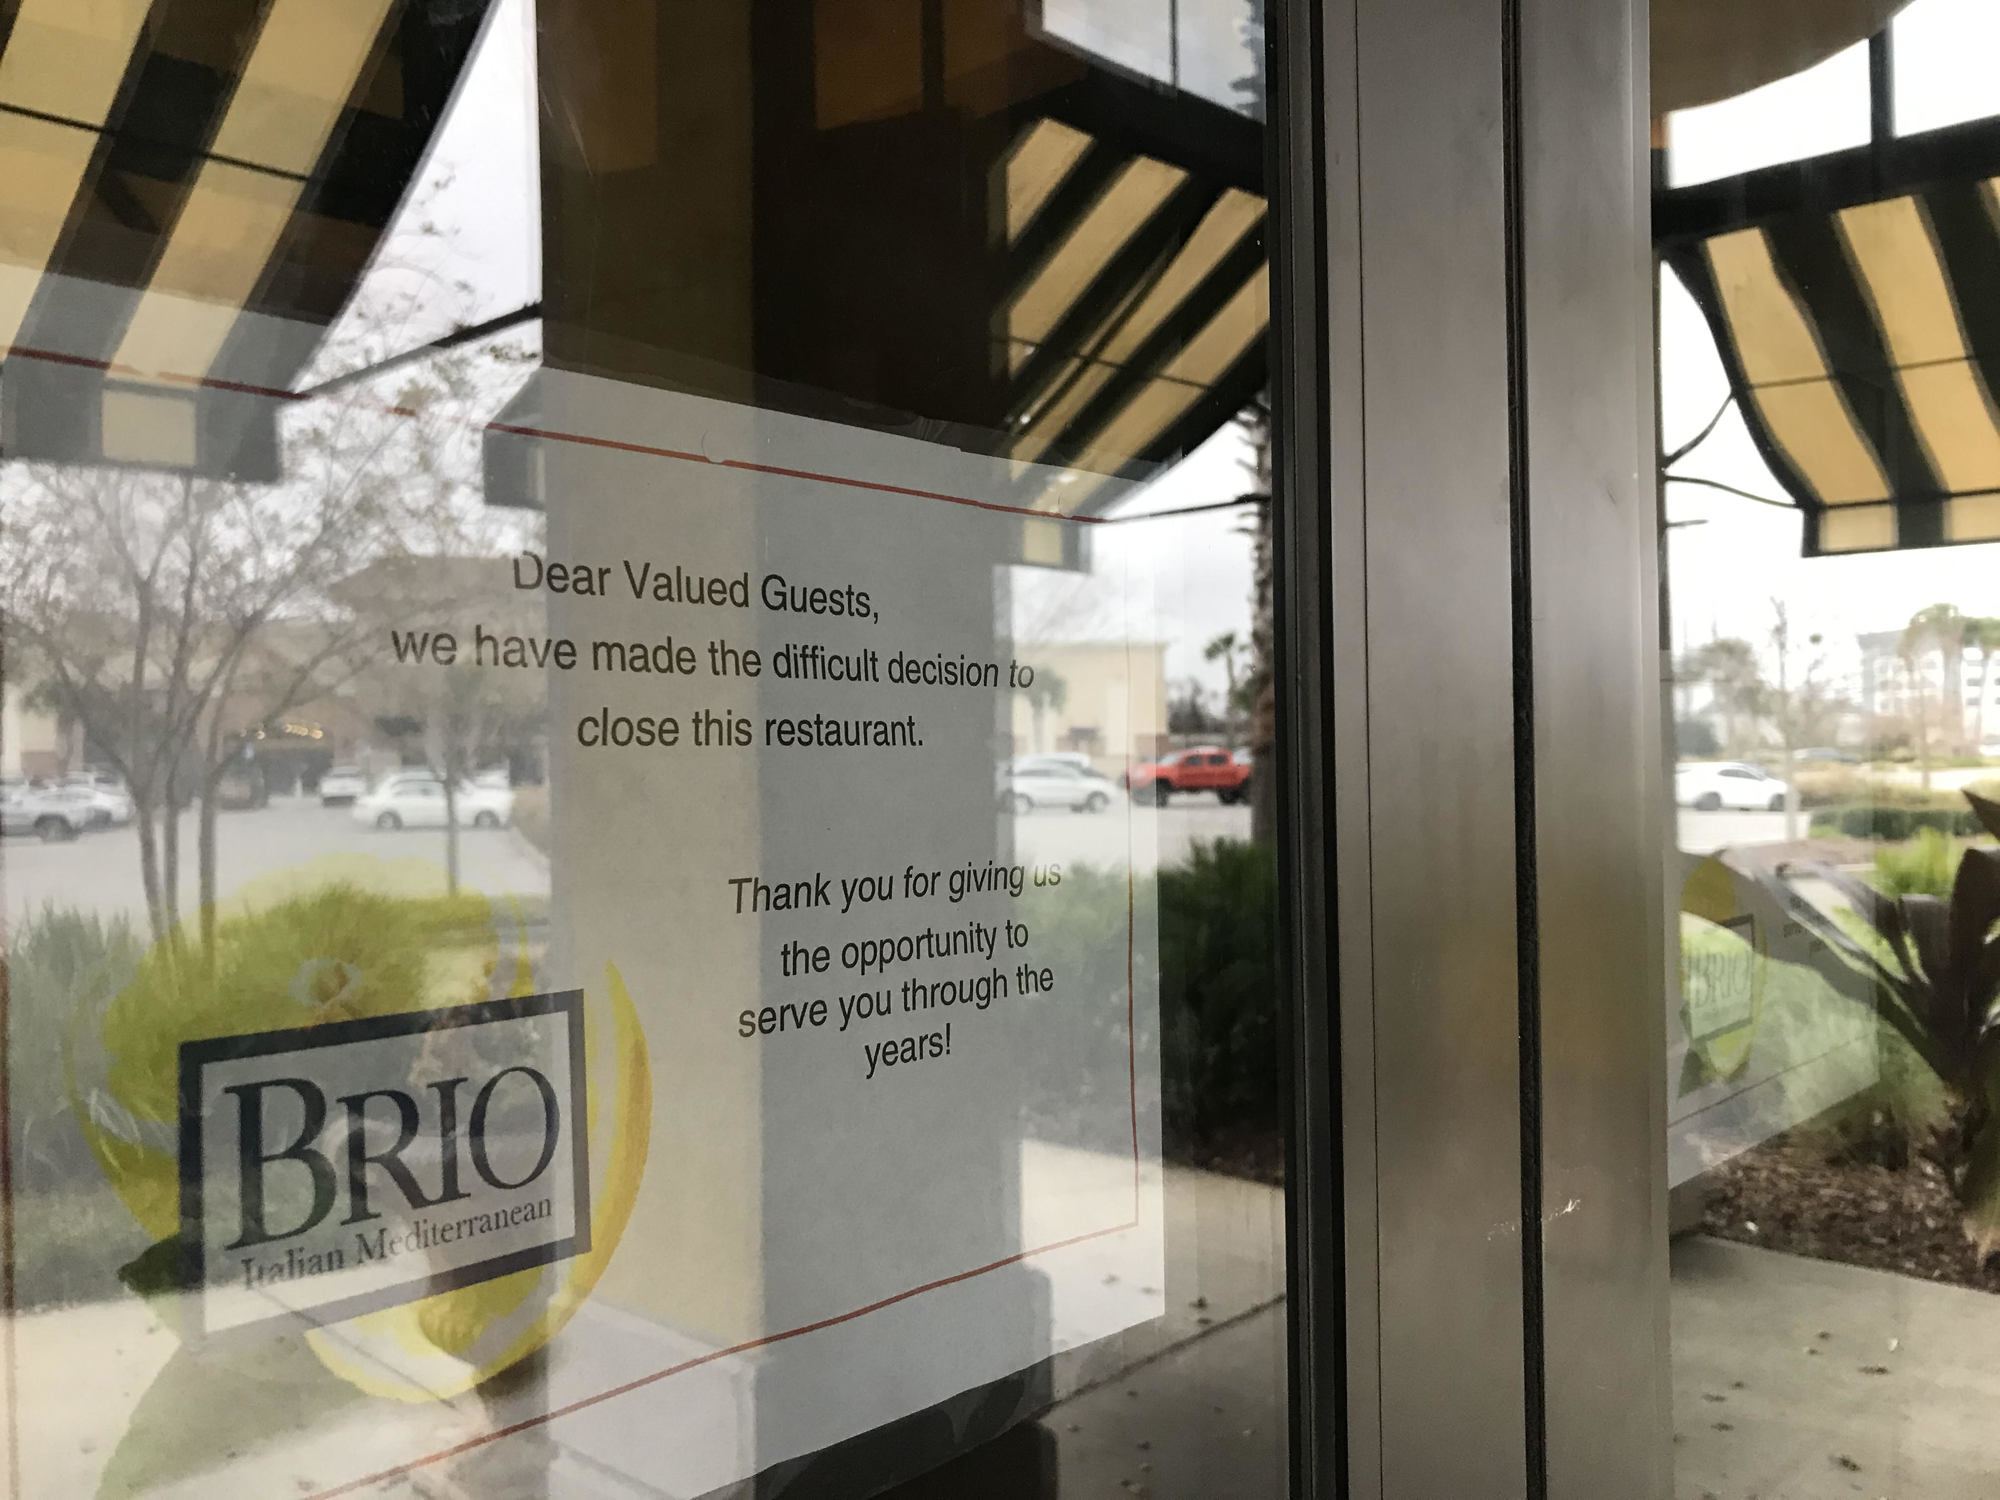 A sign was posted on the front door of the restaurant.